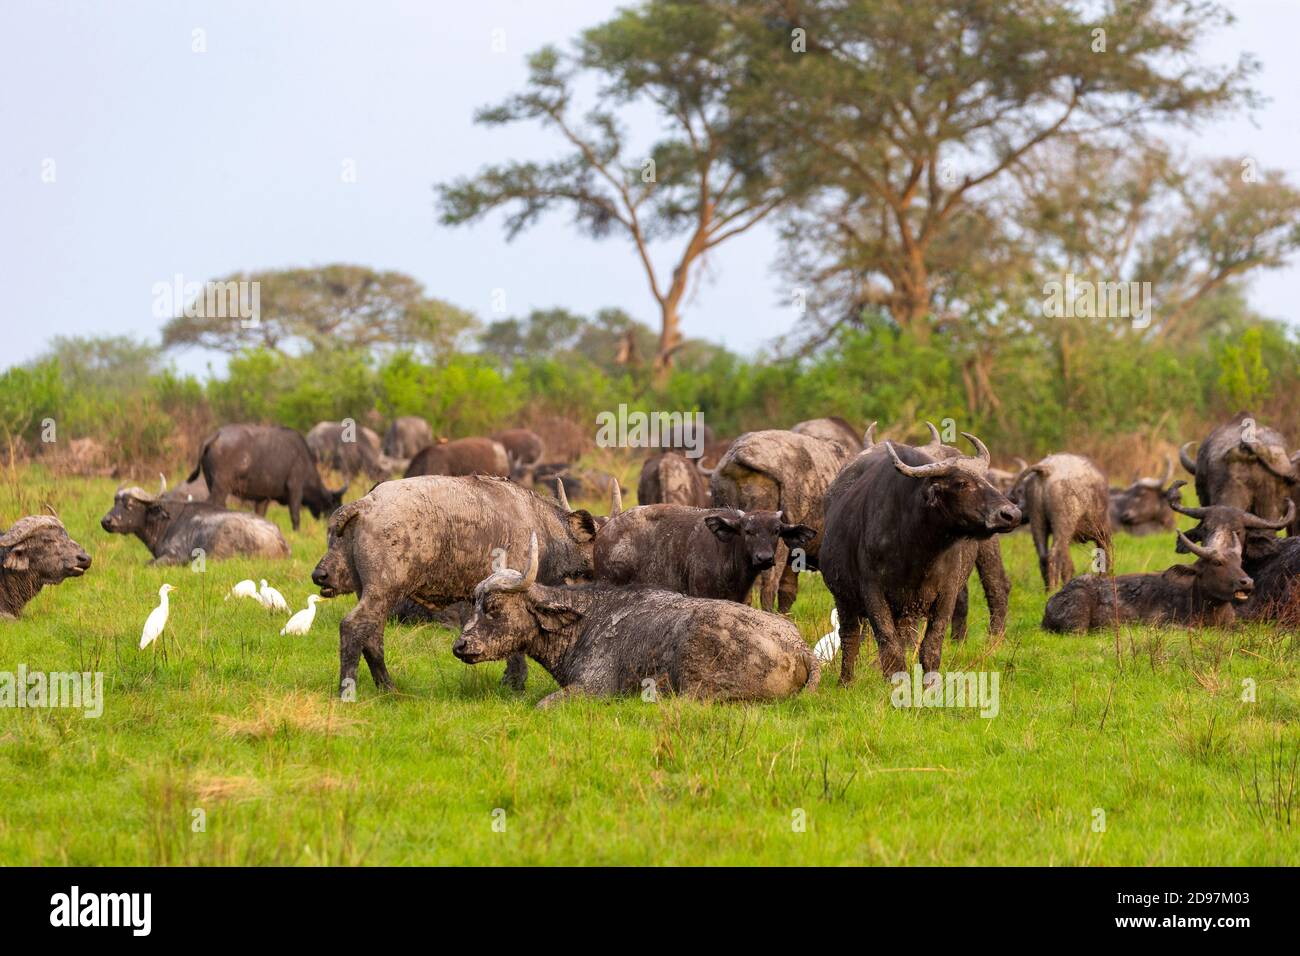 Cape buffalo (Syncerus caffer) gather during the rainy season to graze the lush grasslands at Ishasha in the southwest sector of the Queen Elizabeth N Stock Photo